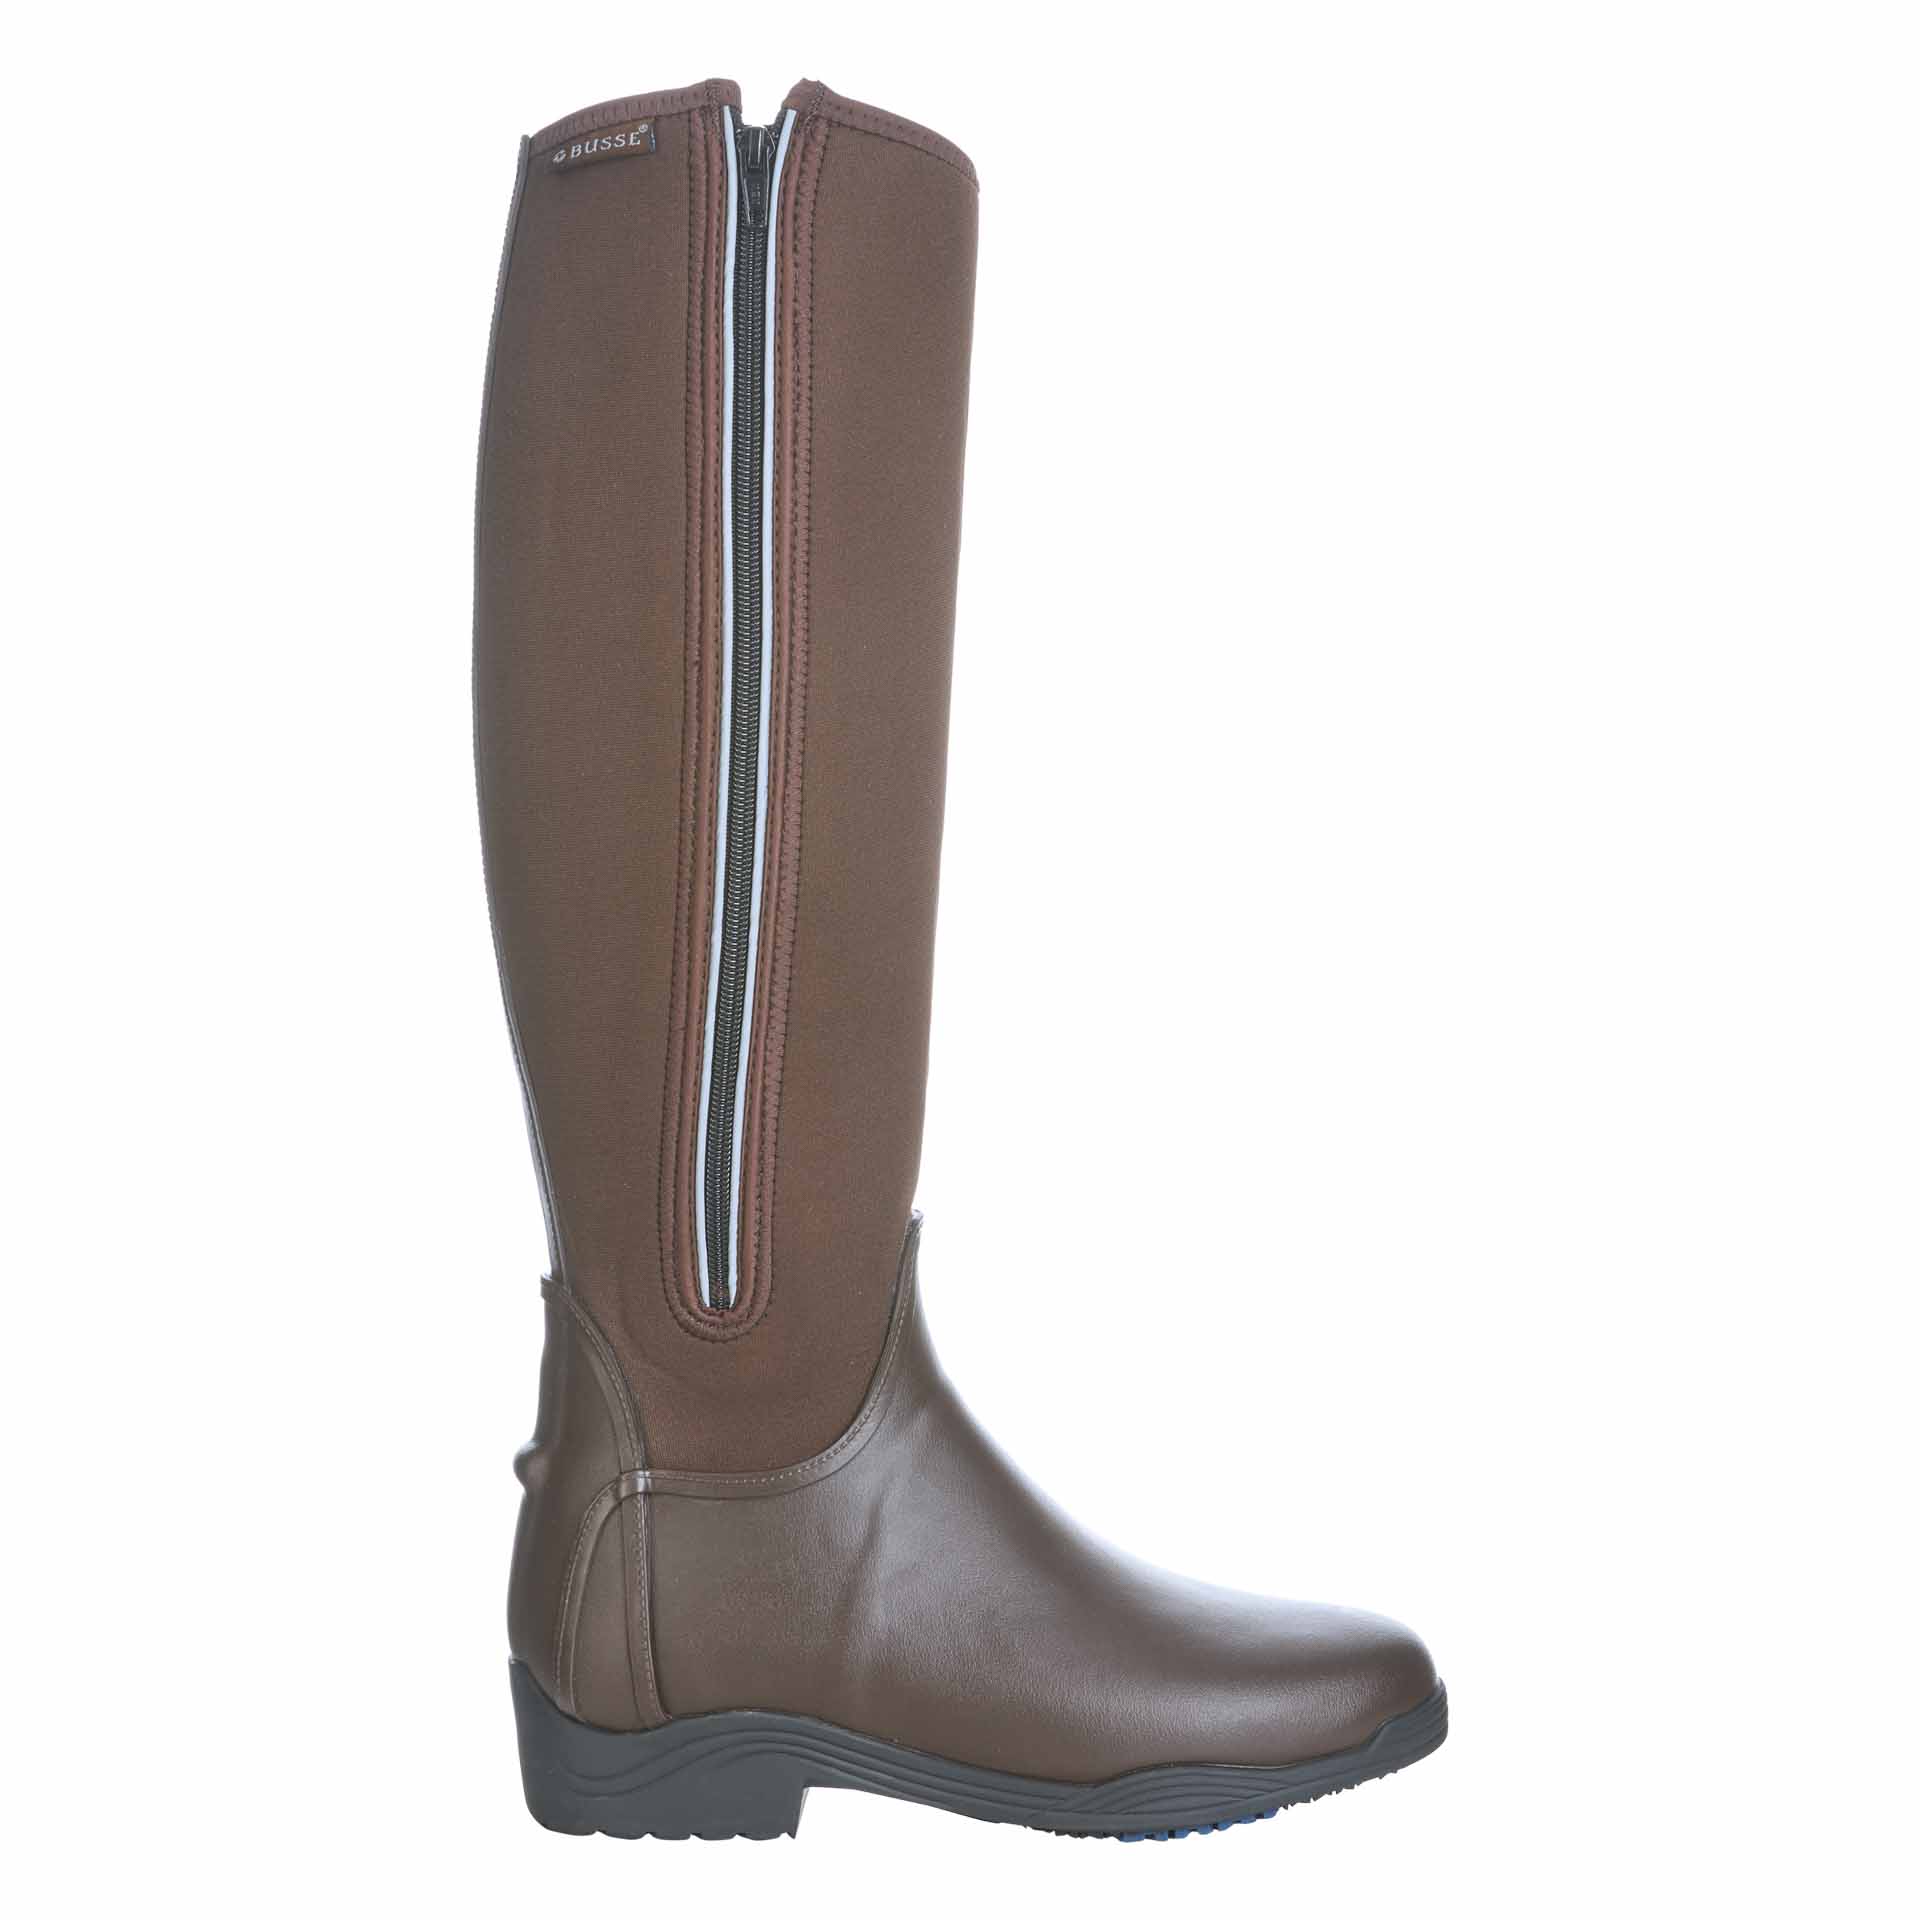 BUSSE Riding Mud Boots CALGARY, brown 40 kw